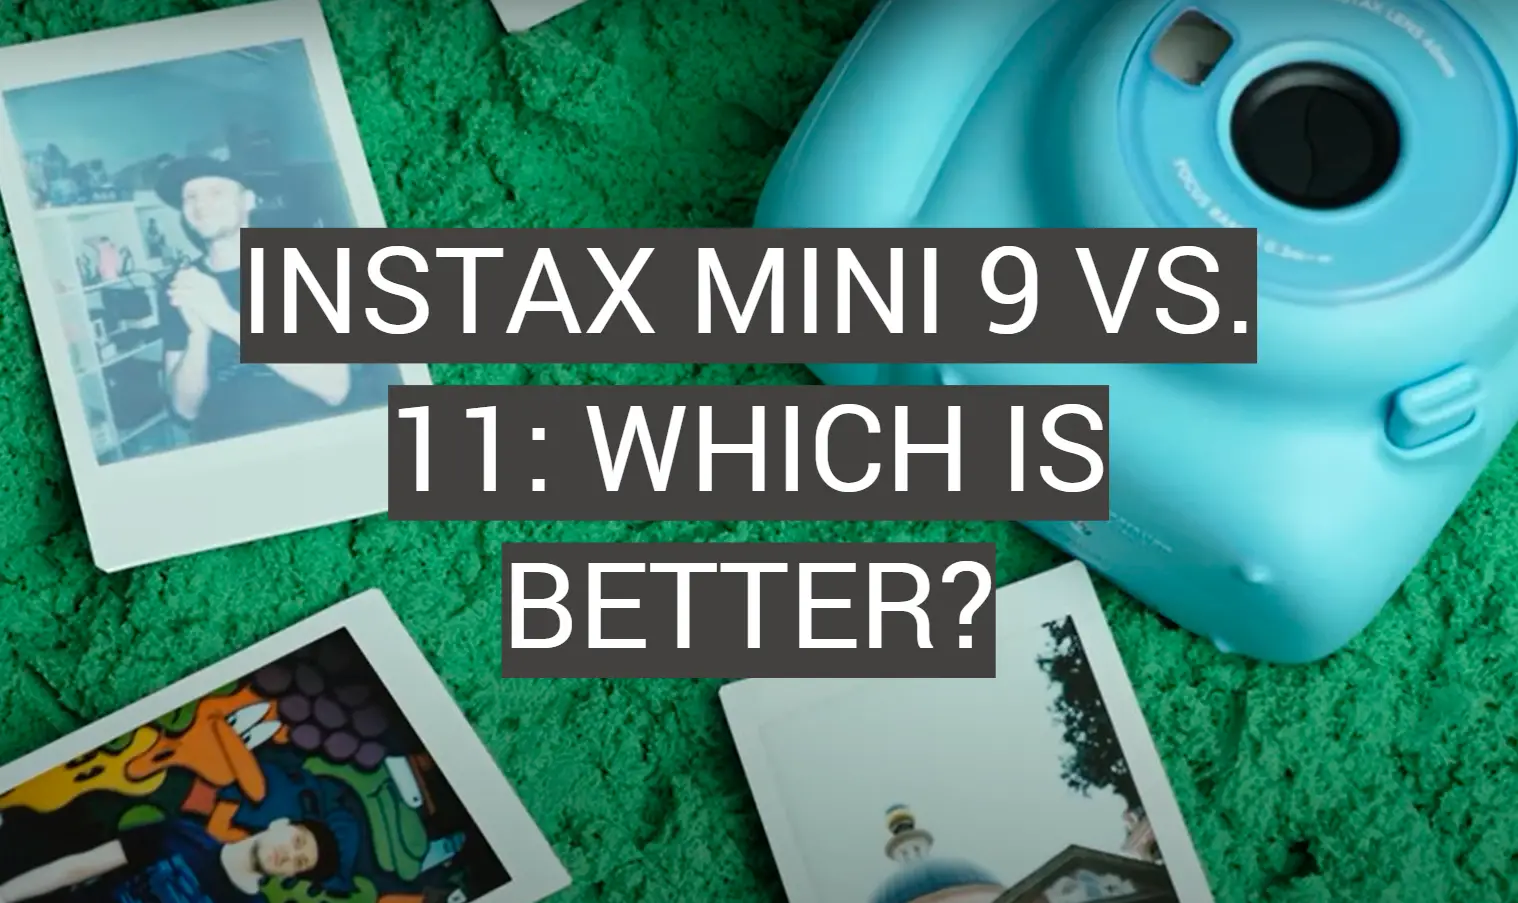 Instax Mini 9 vs. 11: Which is Better?